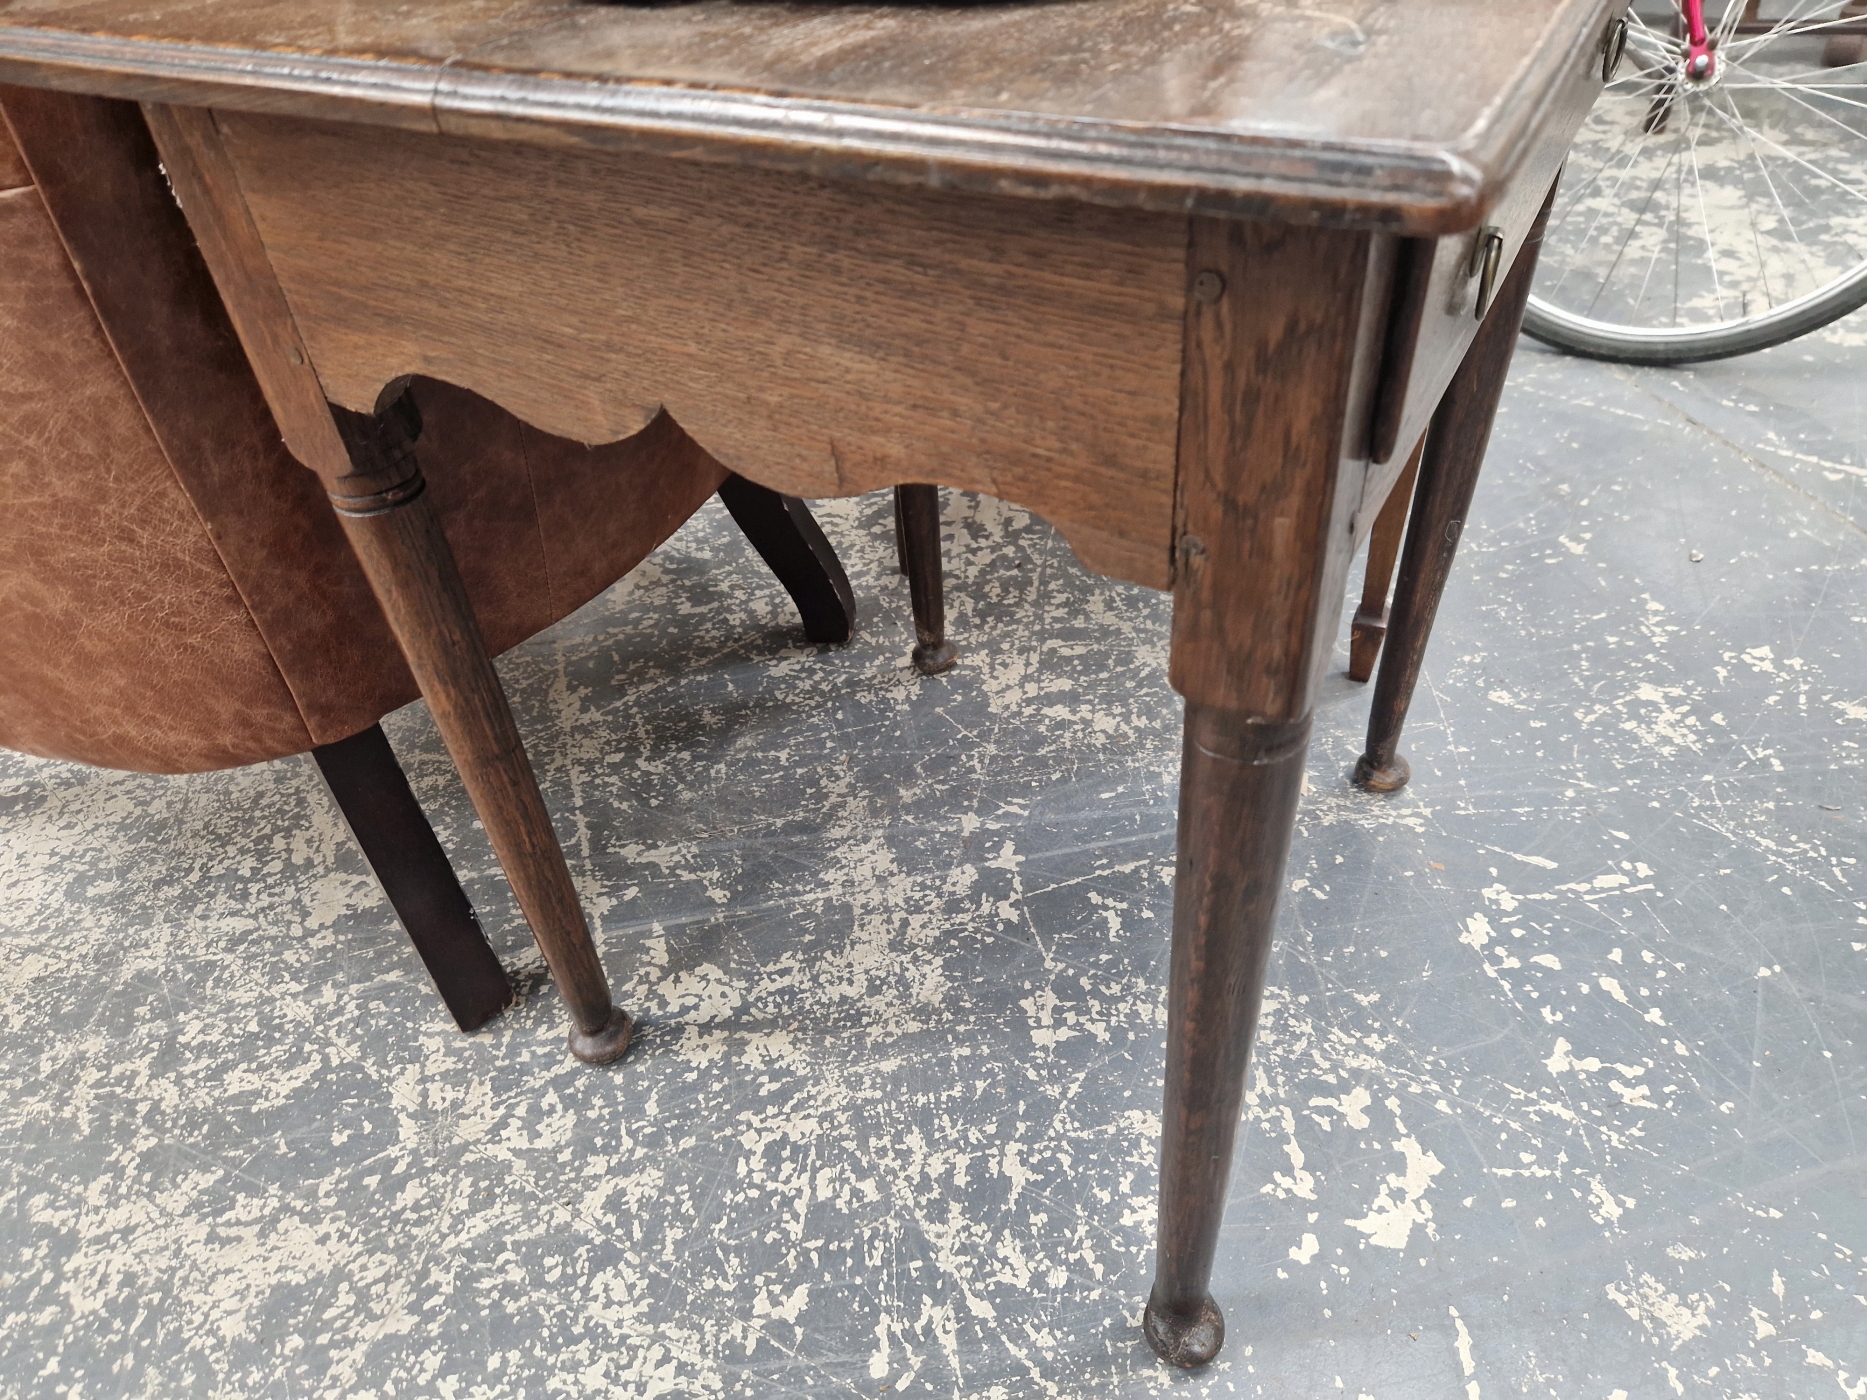 AN EARLY 19th C. OAK SINGLE DRAWER SIDE TABLE ON CYLINDRICAL LEGS TAPERING TO PAD FEET - Image 3 of 6